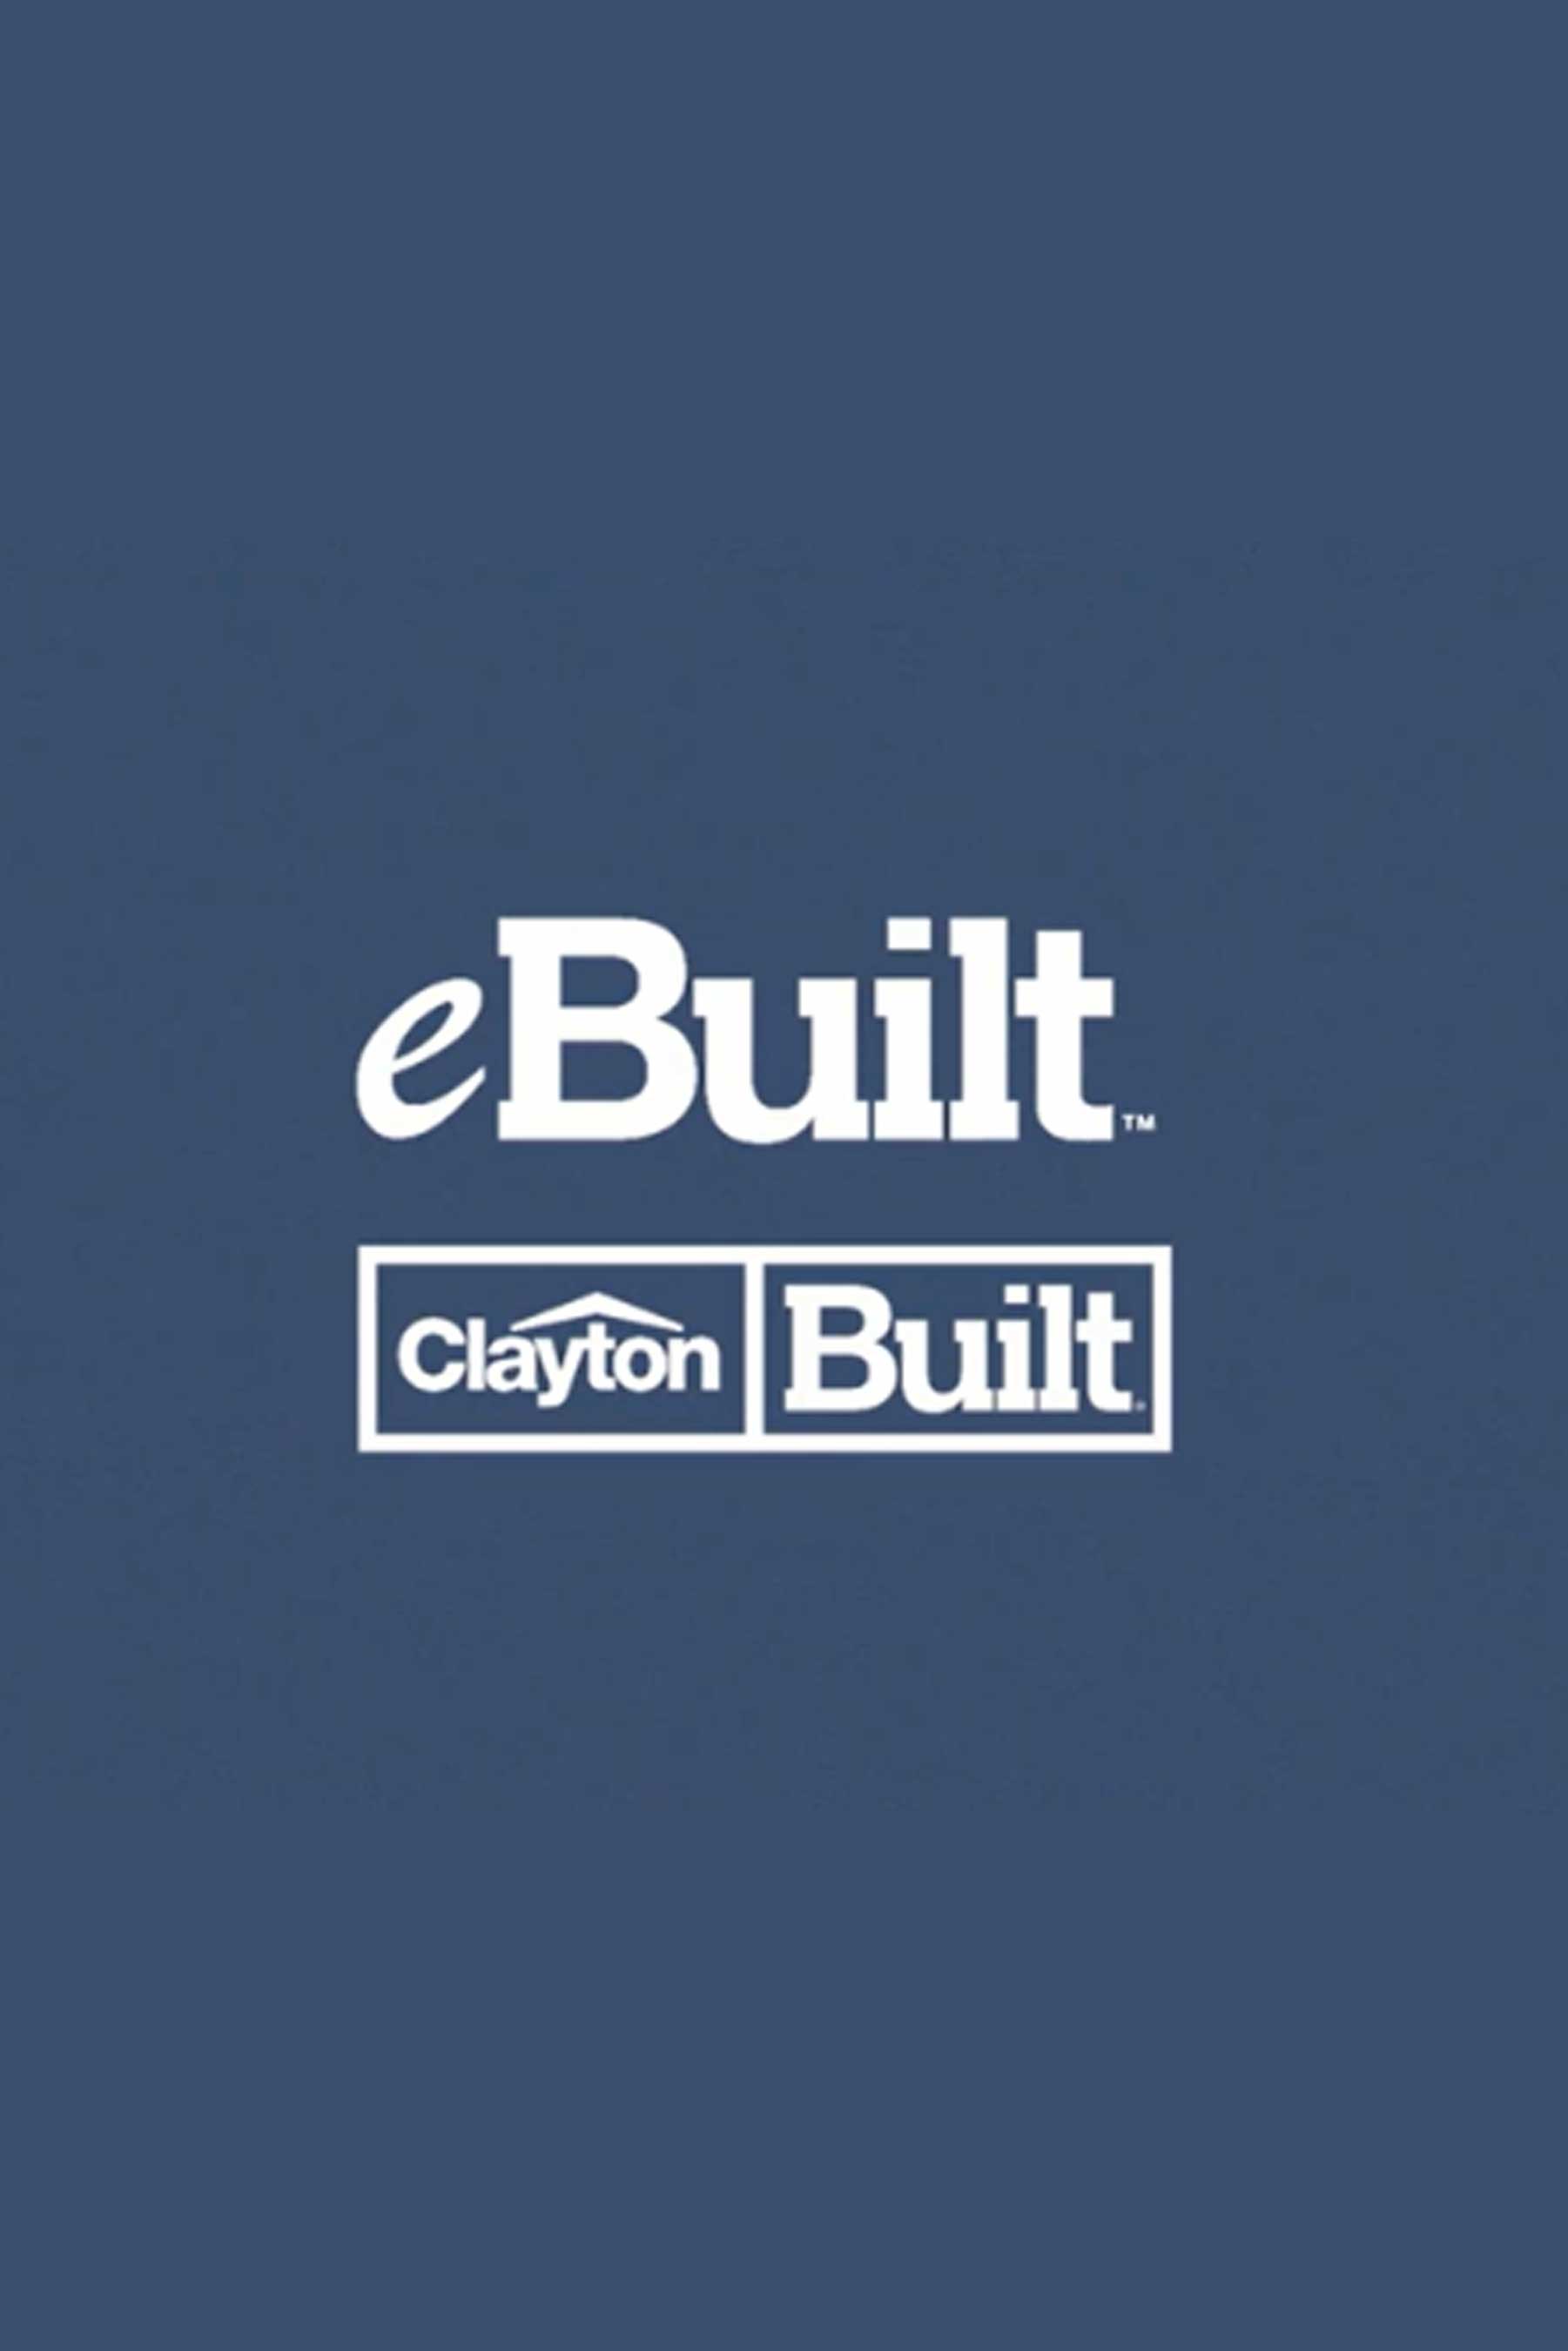 All eBuilt™  homes have 25 enhancements that contribute to their energy efficiency – watch to learn more about some of those features.